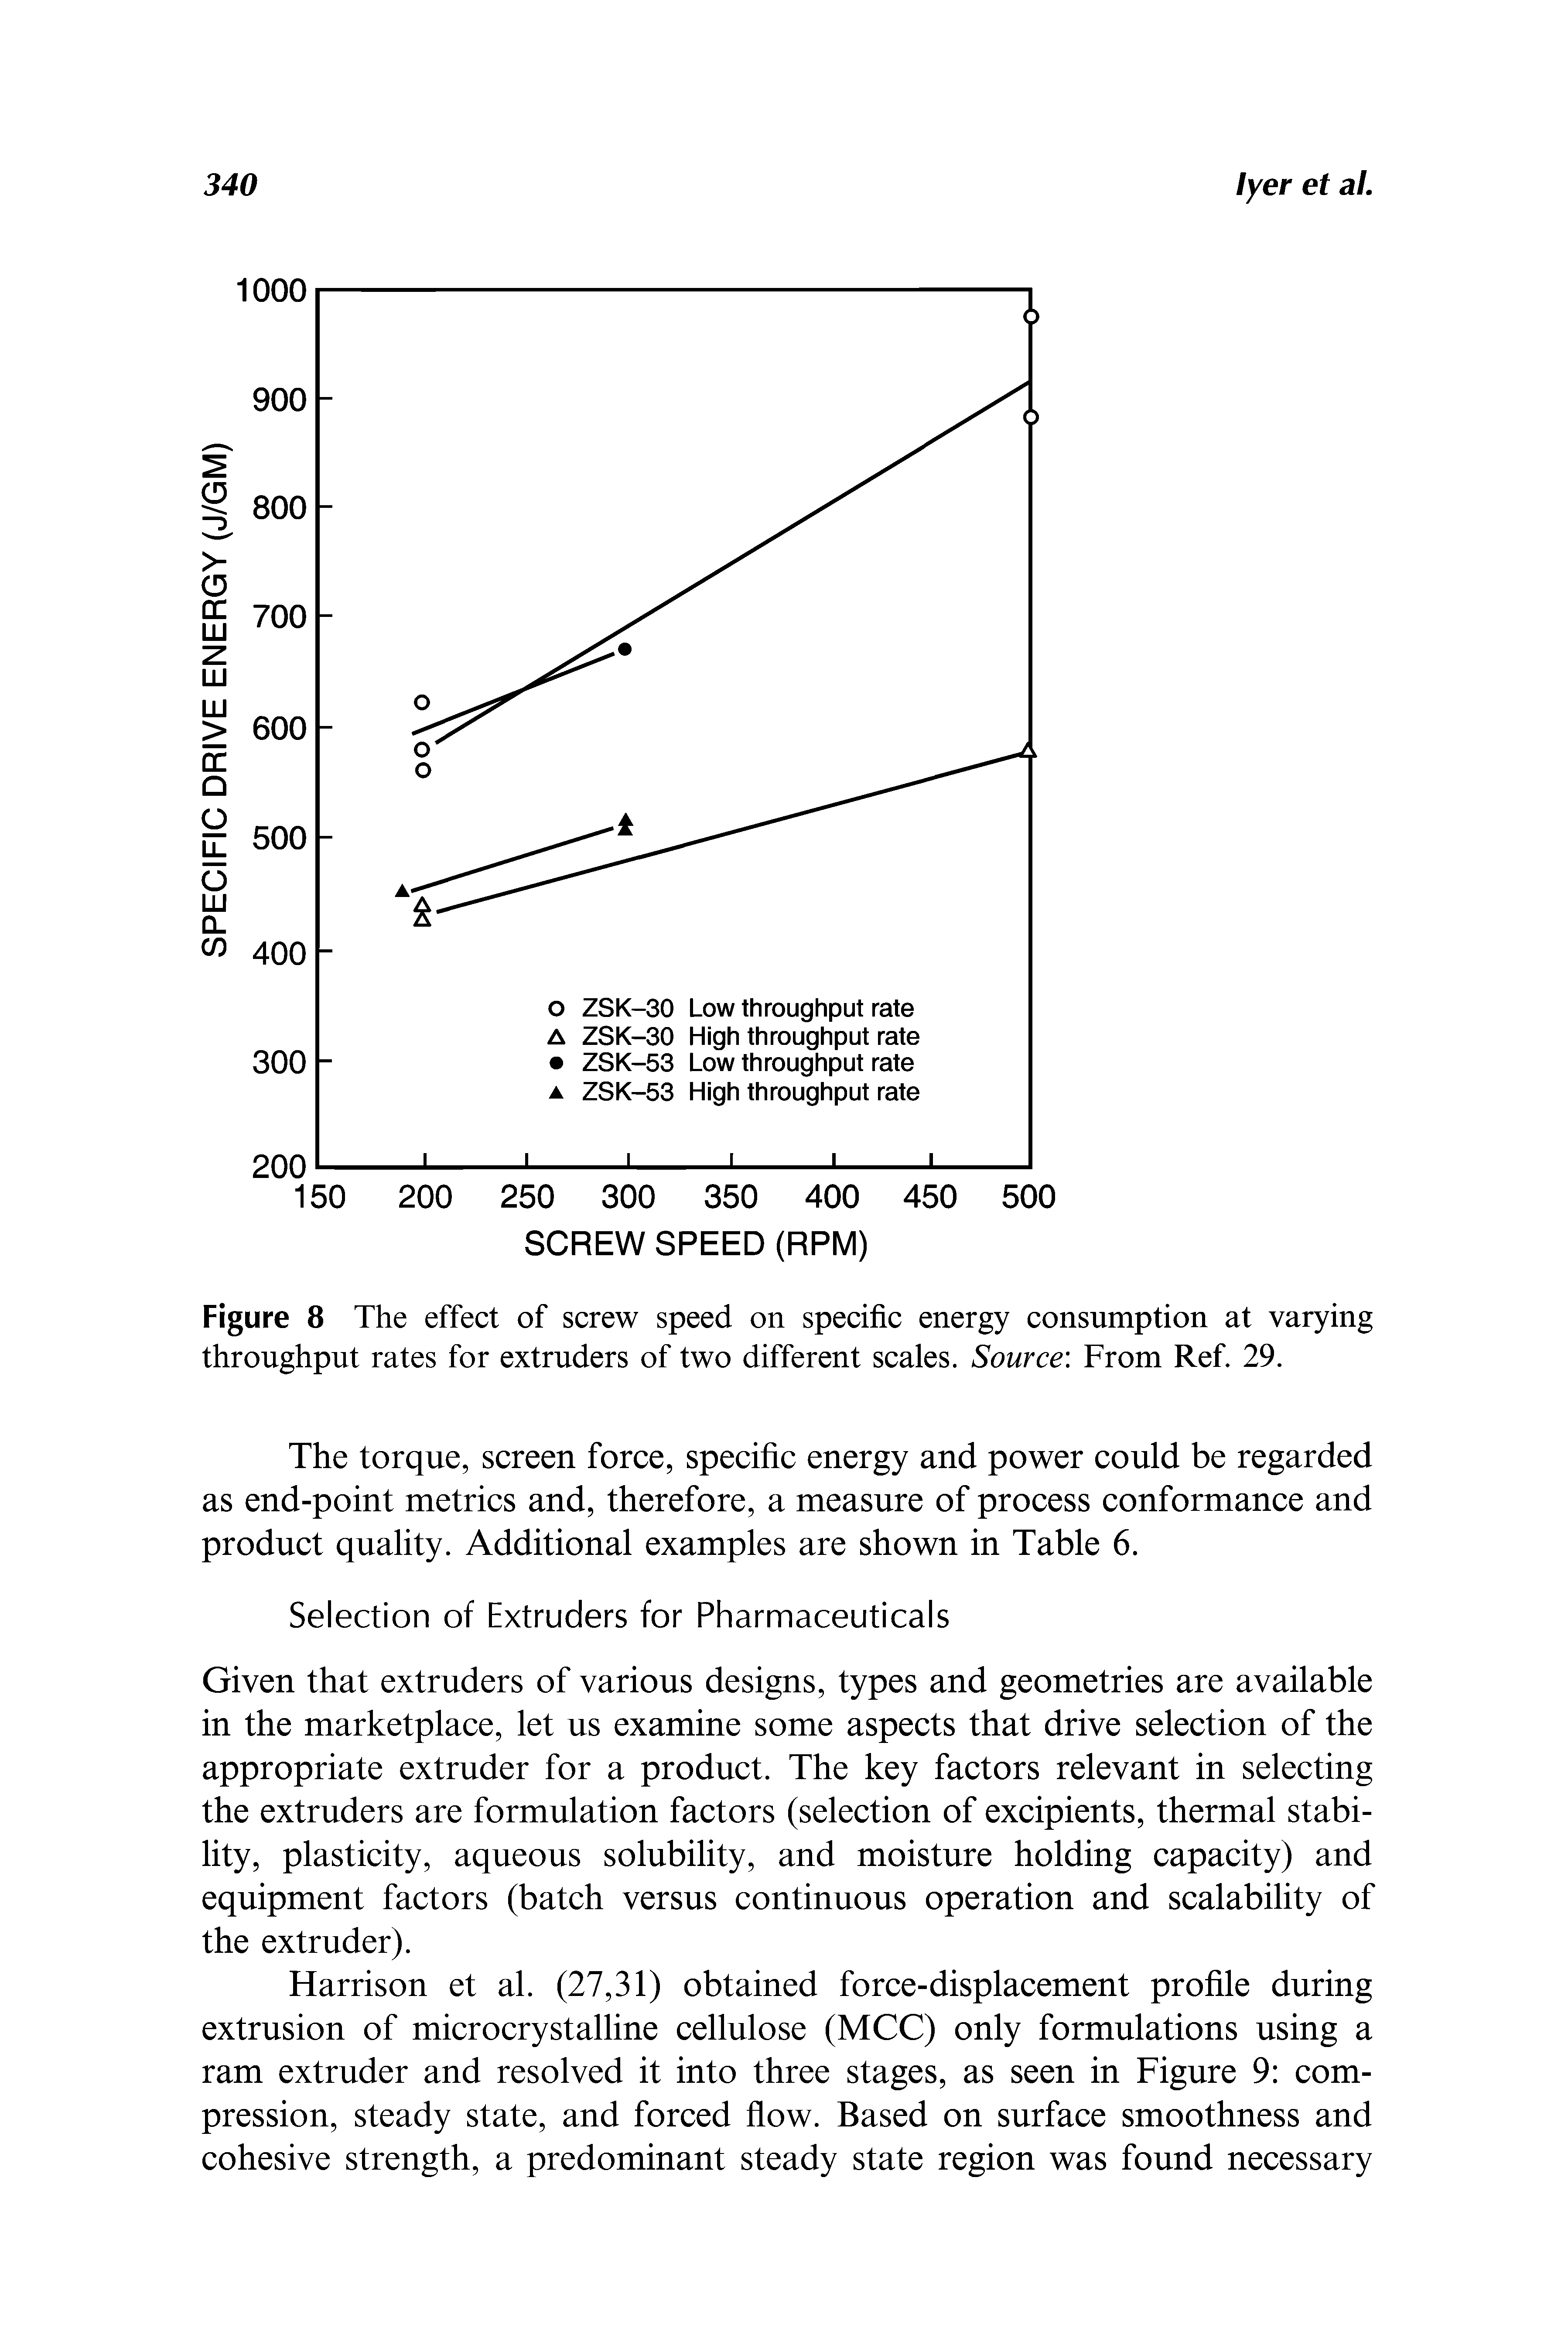 Figure 8 The effect of screw speed on specific energy consumption at varying throughput rates for extruders of two different scales. Source From Ref. 29.